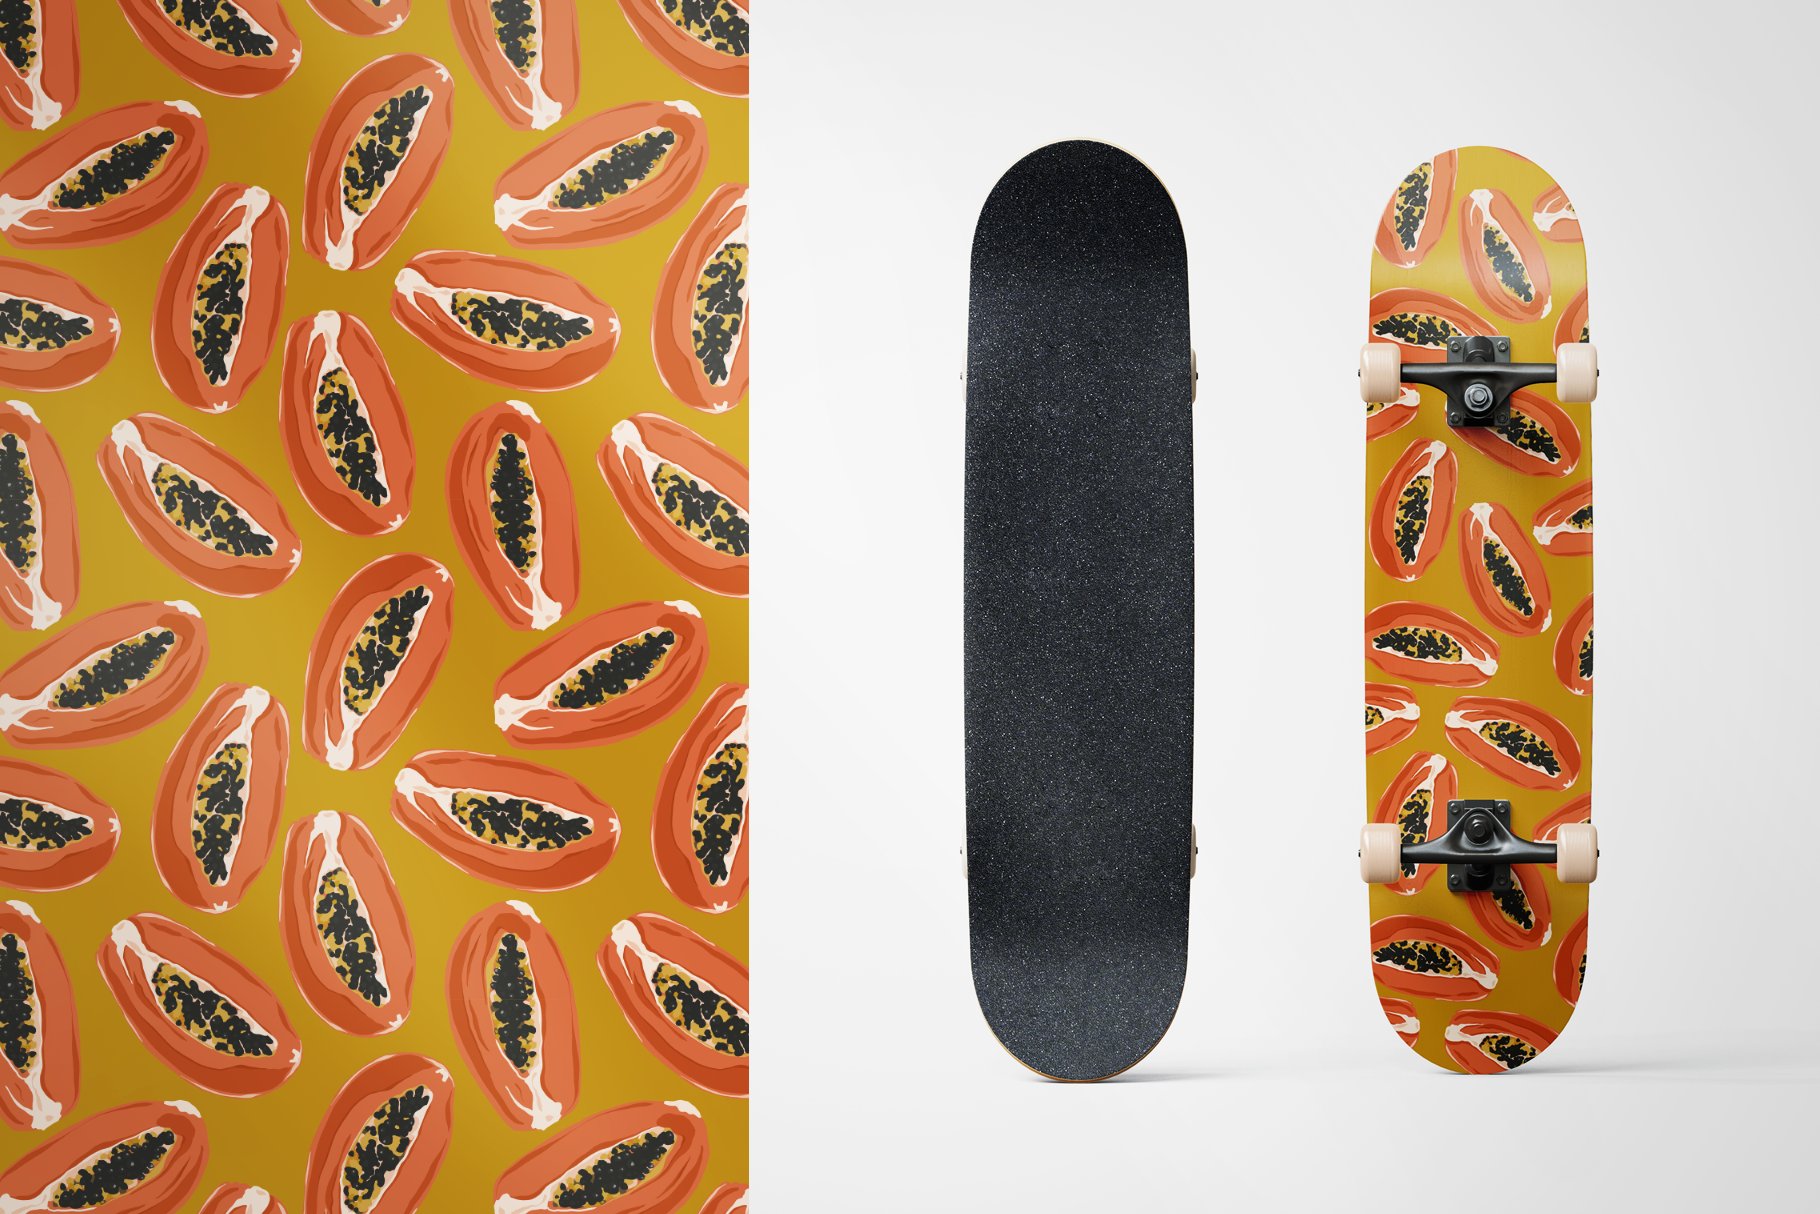 Skateboard is shown next to a wallpaper.